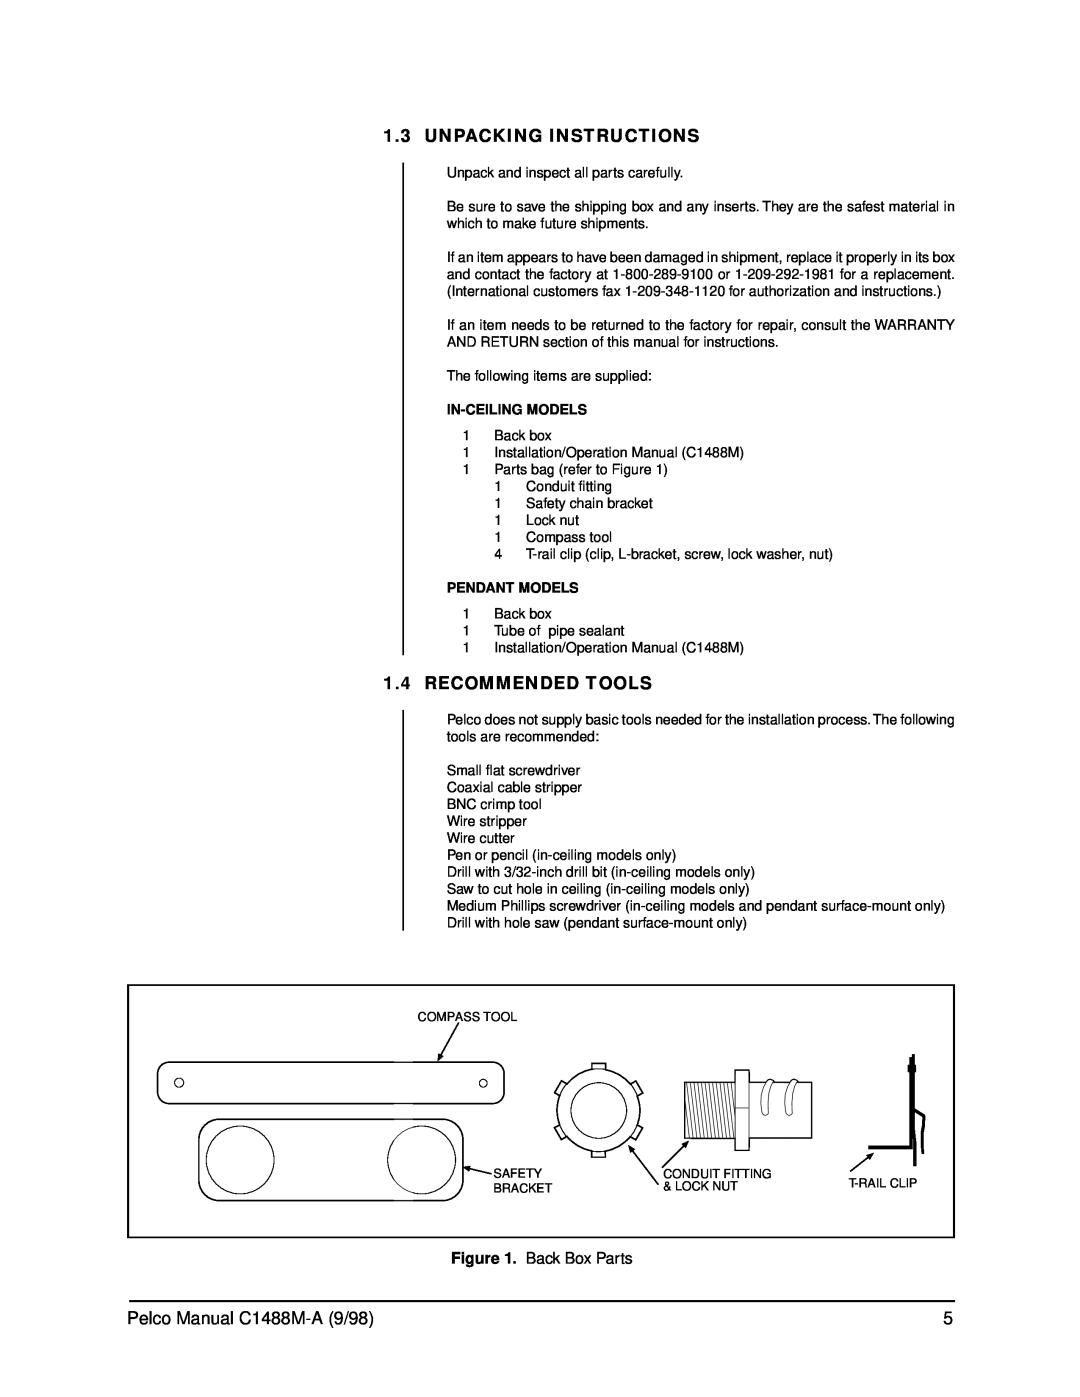 Pelco BB5L operation manual Unpacking Instructions, Recommended Tools, Back Box Parts, In-Ceiling Models, Pendant Models 